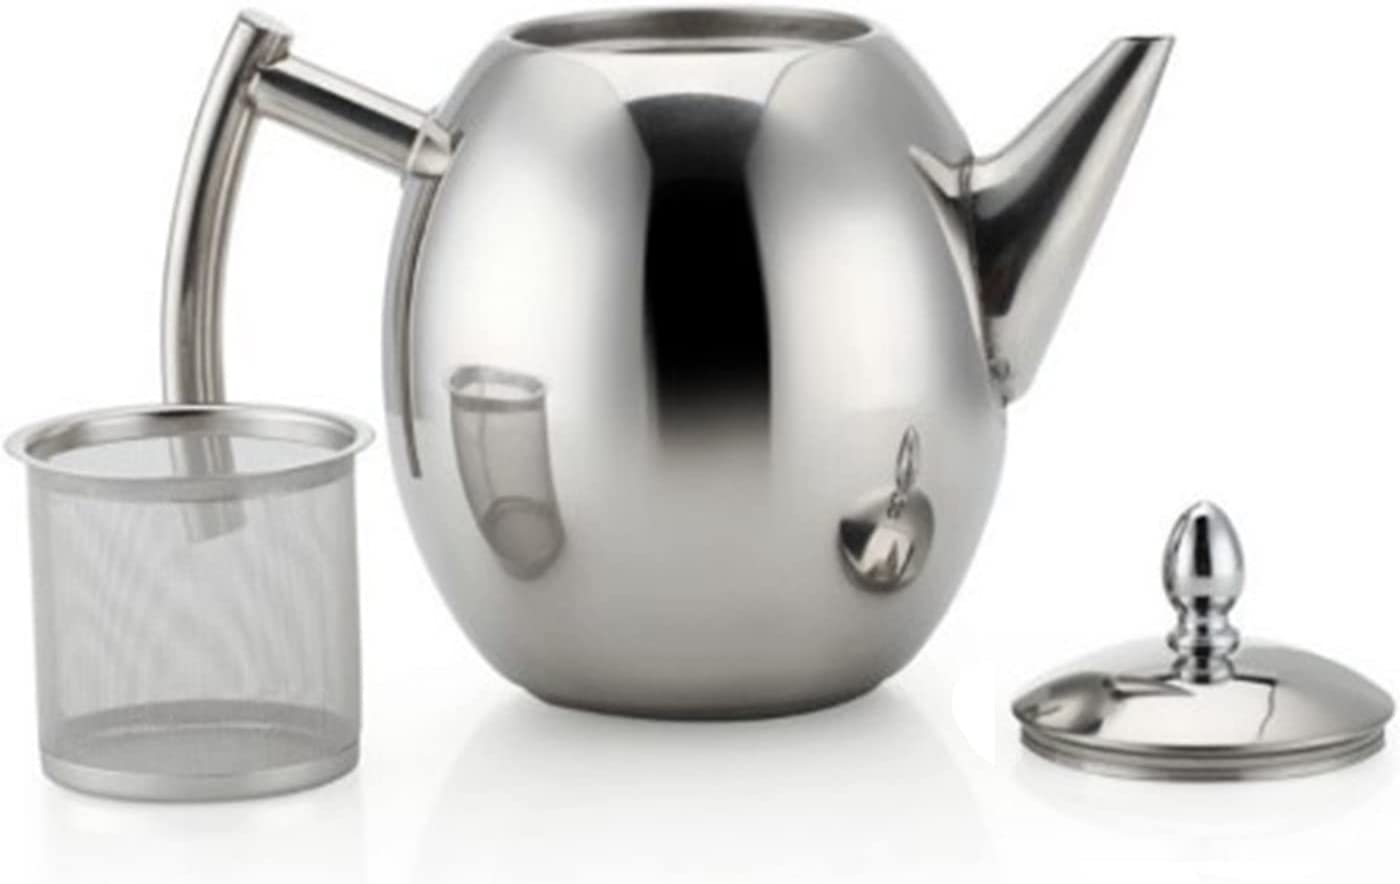 Queiting 1.5 L Teapot Stainless Steel with Strainer Insert Tea Maker Tea Jug Thermal Double-Walled Coffee Pot with Tea Strainer and Insulated Handle Camping Kettle with Stainless Steel Strainer Silver